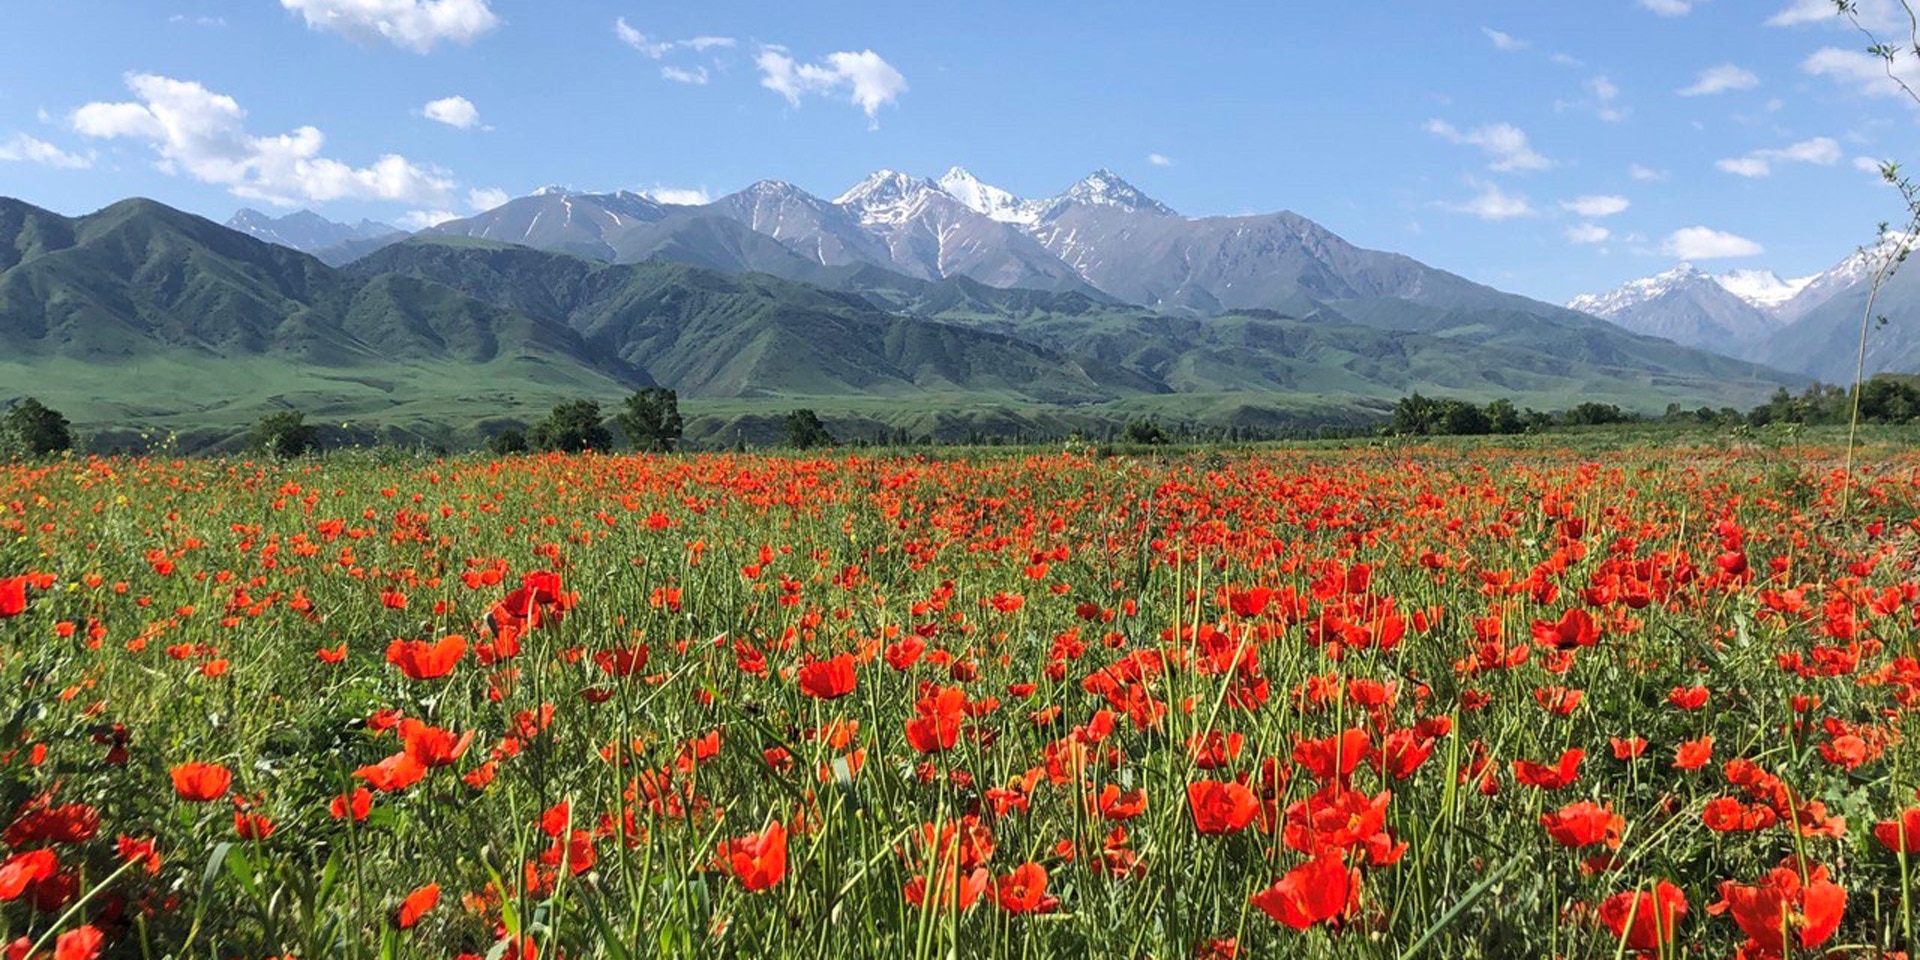 A field of red flowers with snow-capped mountains in the background.